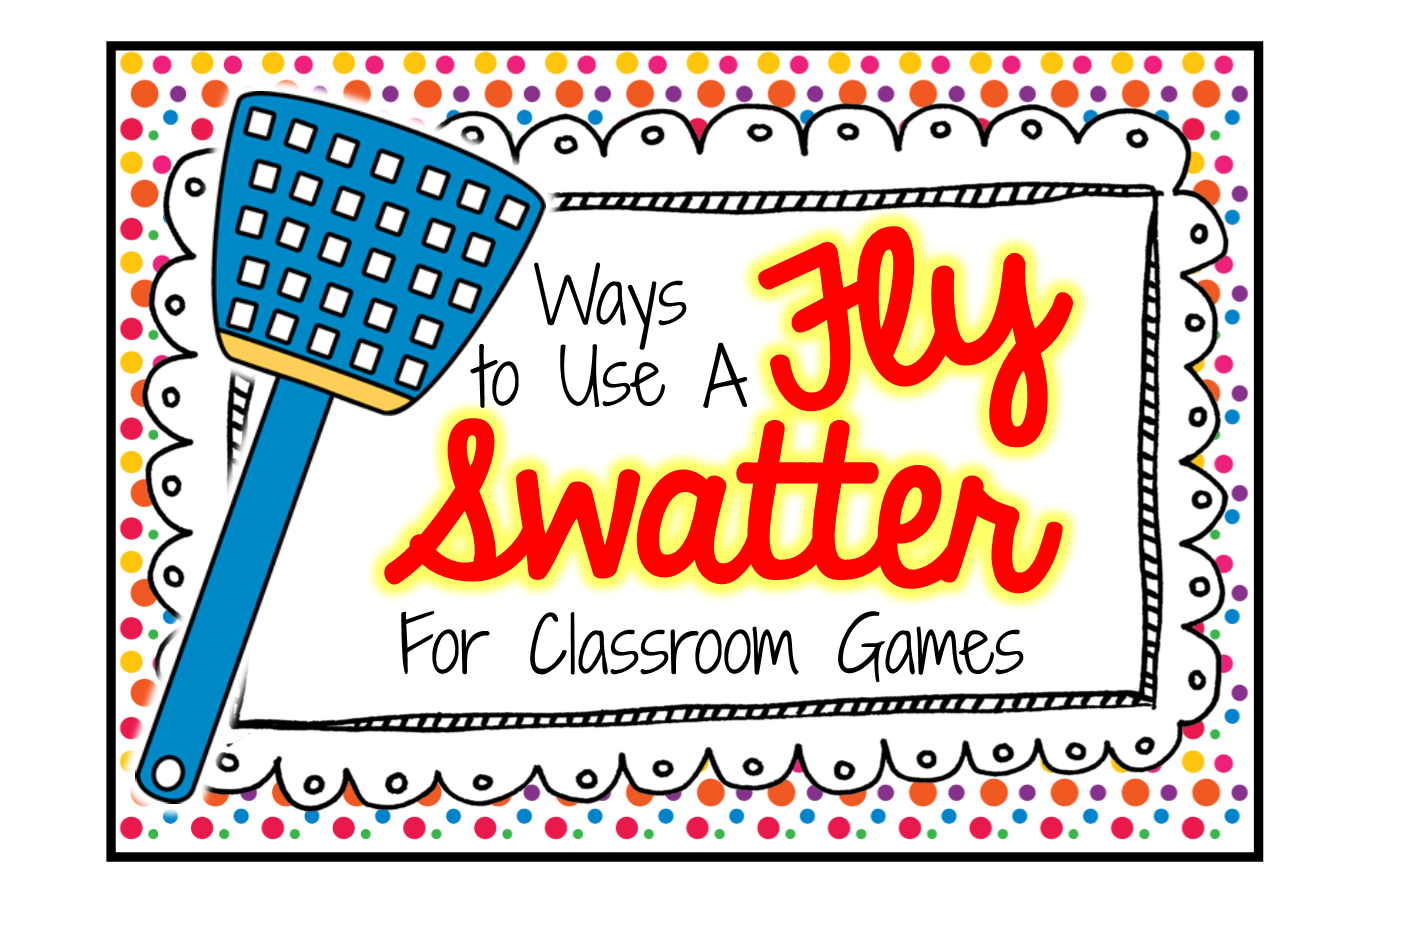 Fly clipart swatting. The classroom game nook